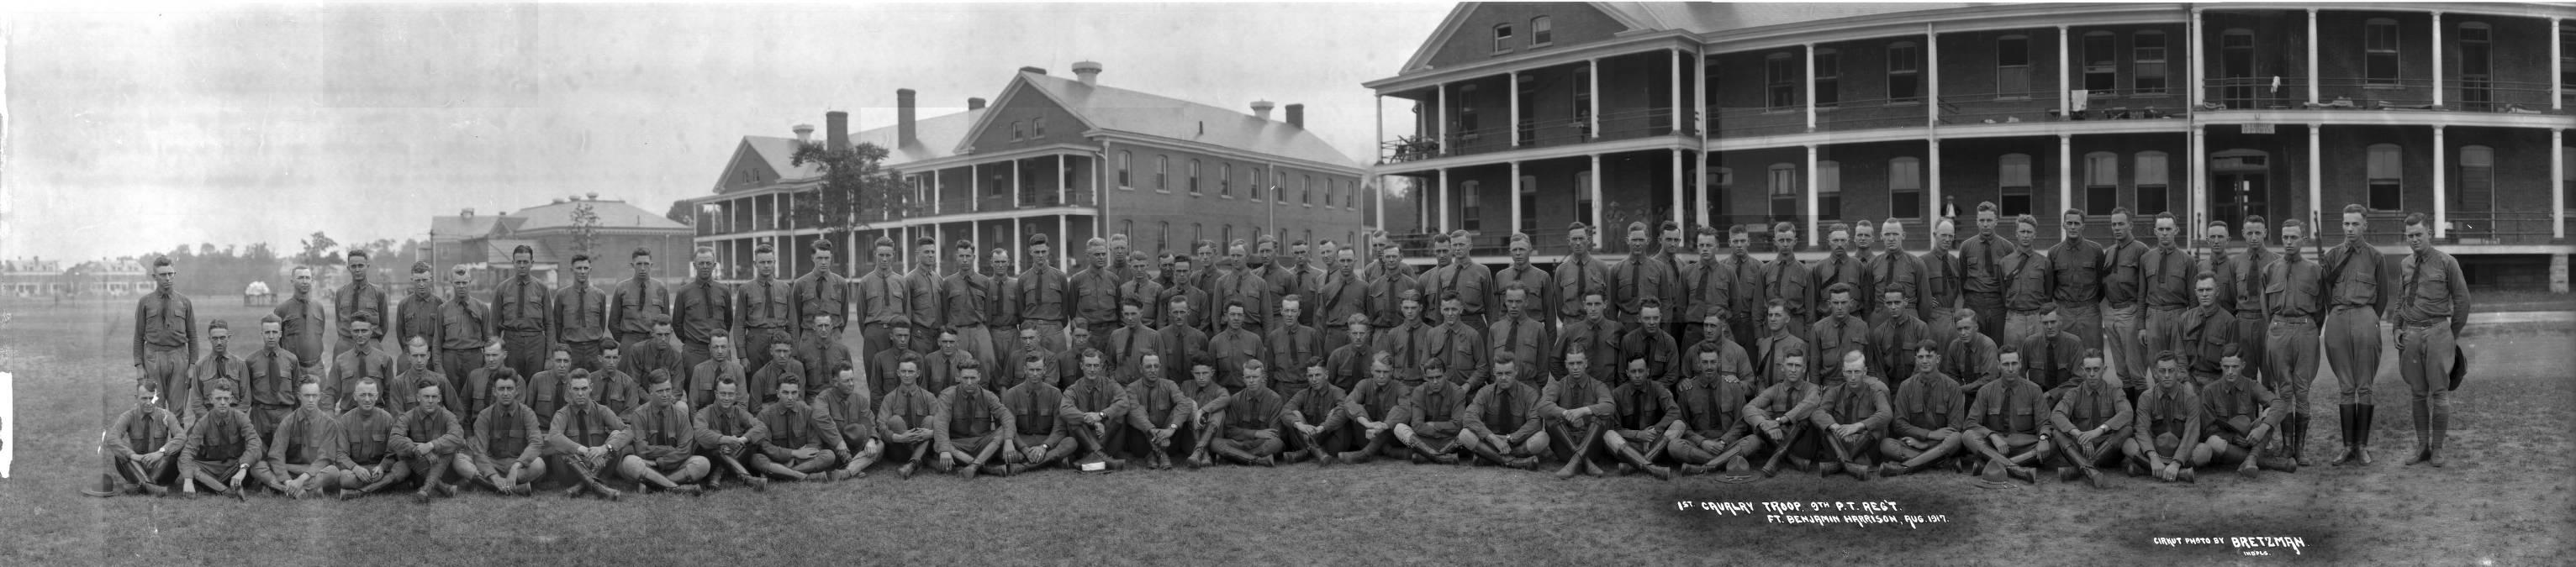 A large group of soldiers pose for photo. 